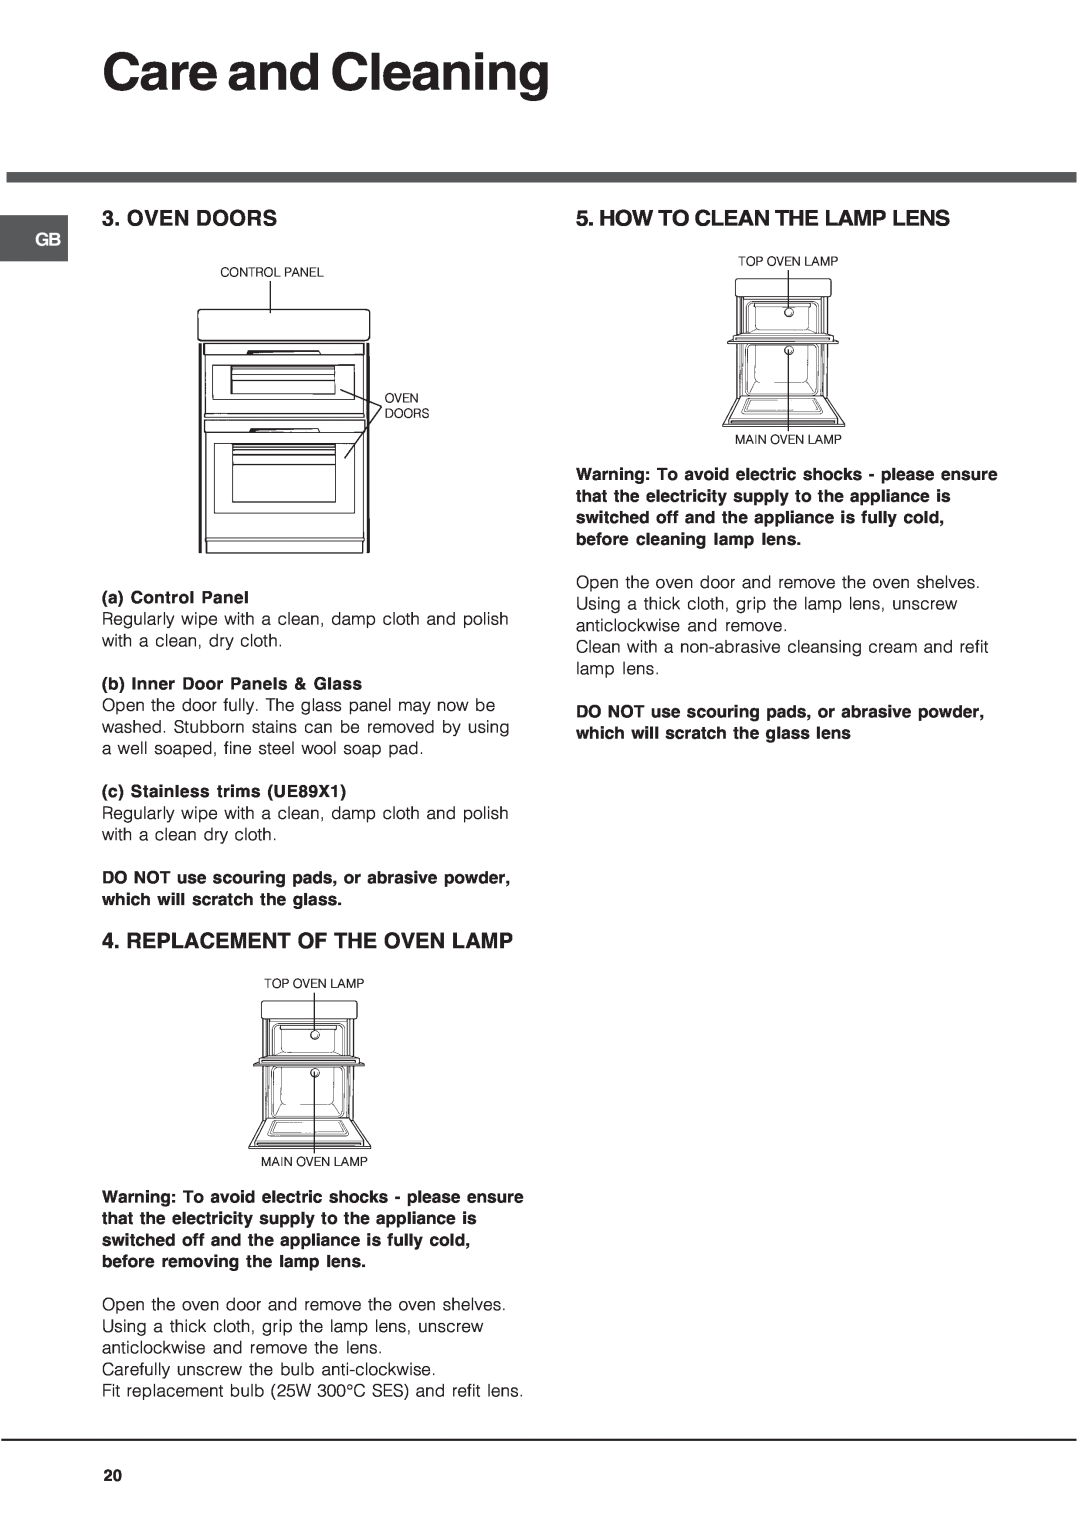 Hotpoint UY46X/2 UH53 manual Care and Cleaning, Oven Doors, Replacement Of The Oven Lamp, How To Clean The Lamp Lens 